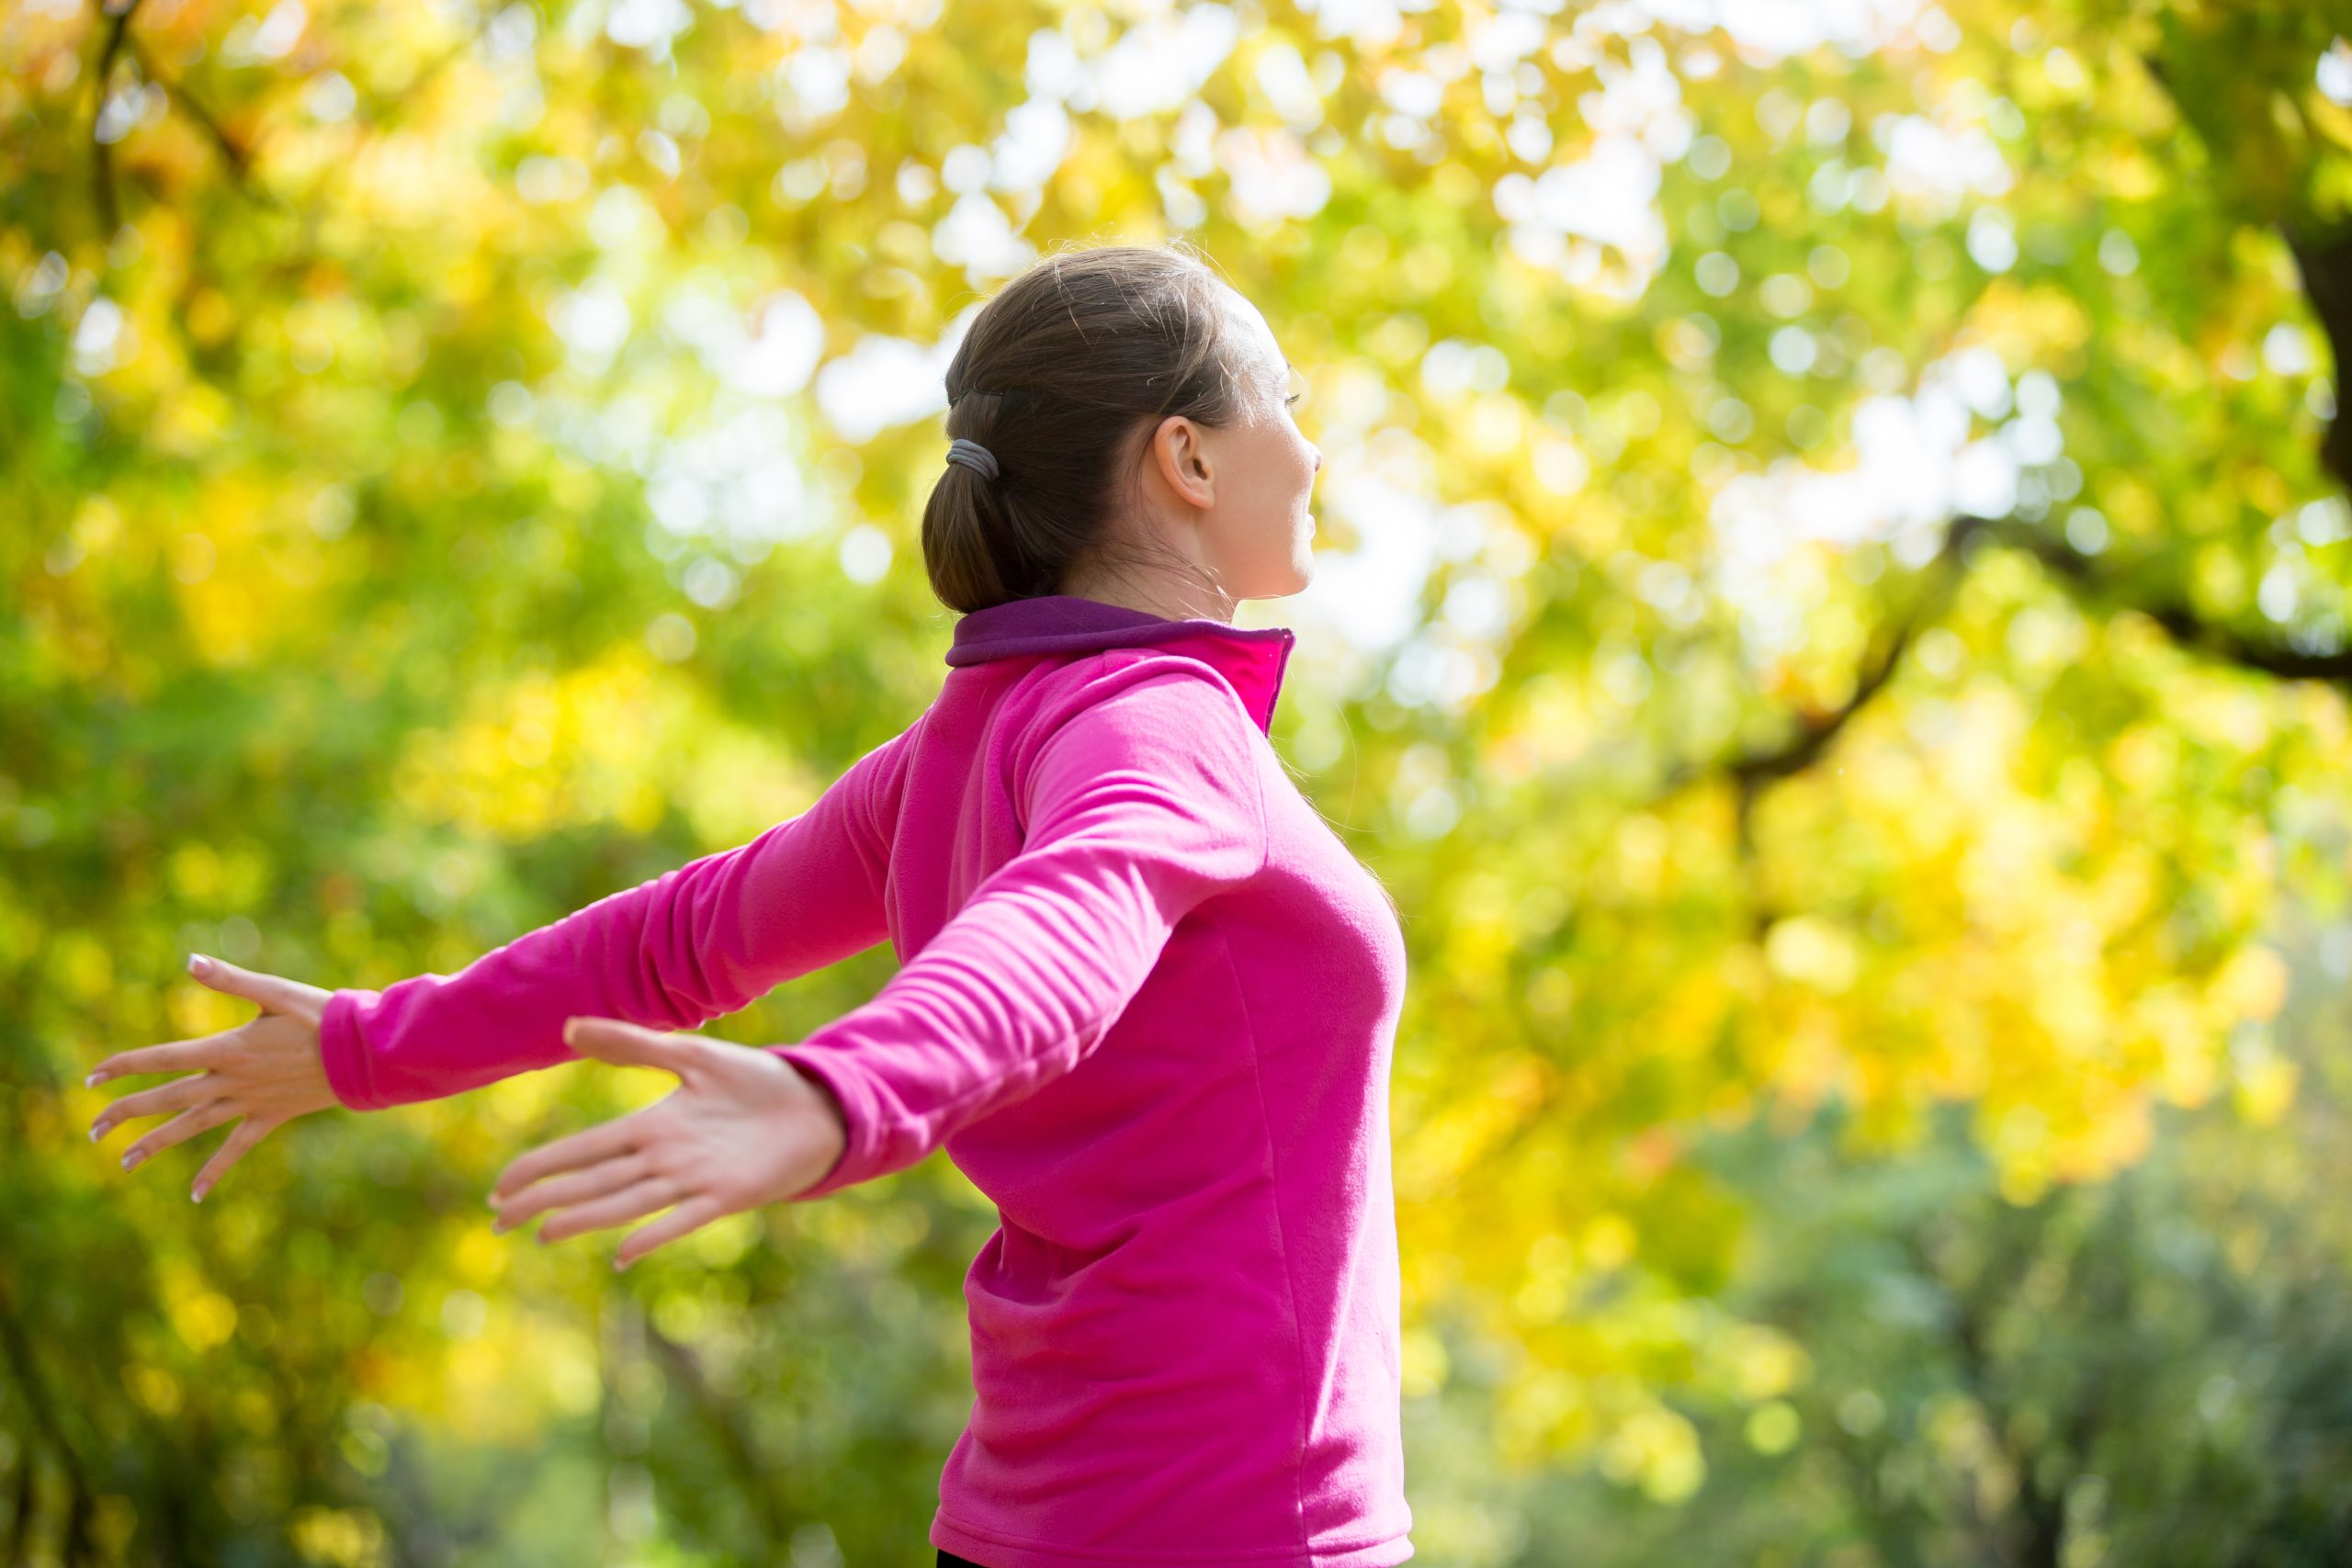 Portrait of an attractive smiling woman outdoors in a sportswear, her hands outstreched. Indian summer. Concept photo, side view